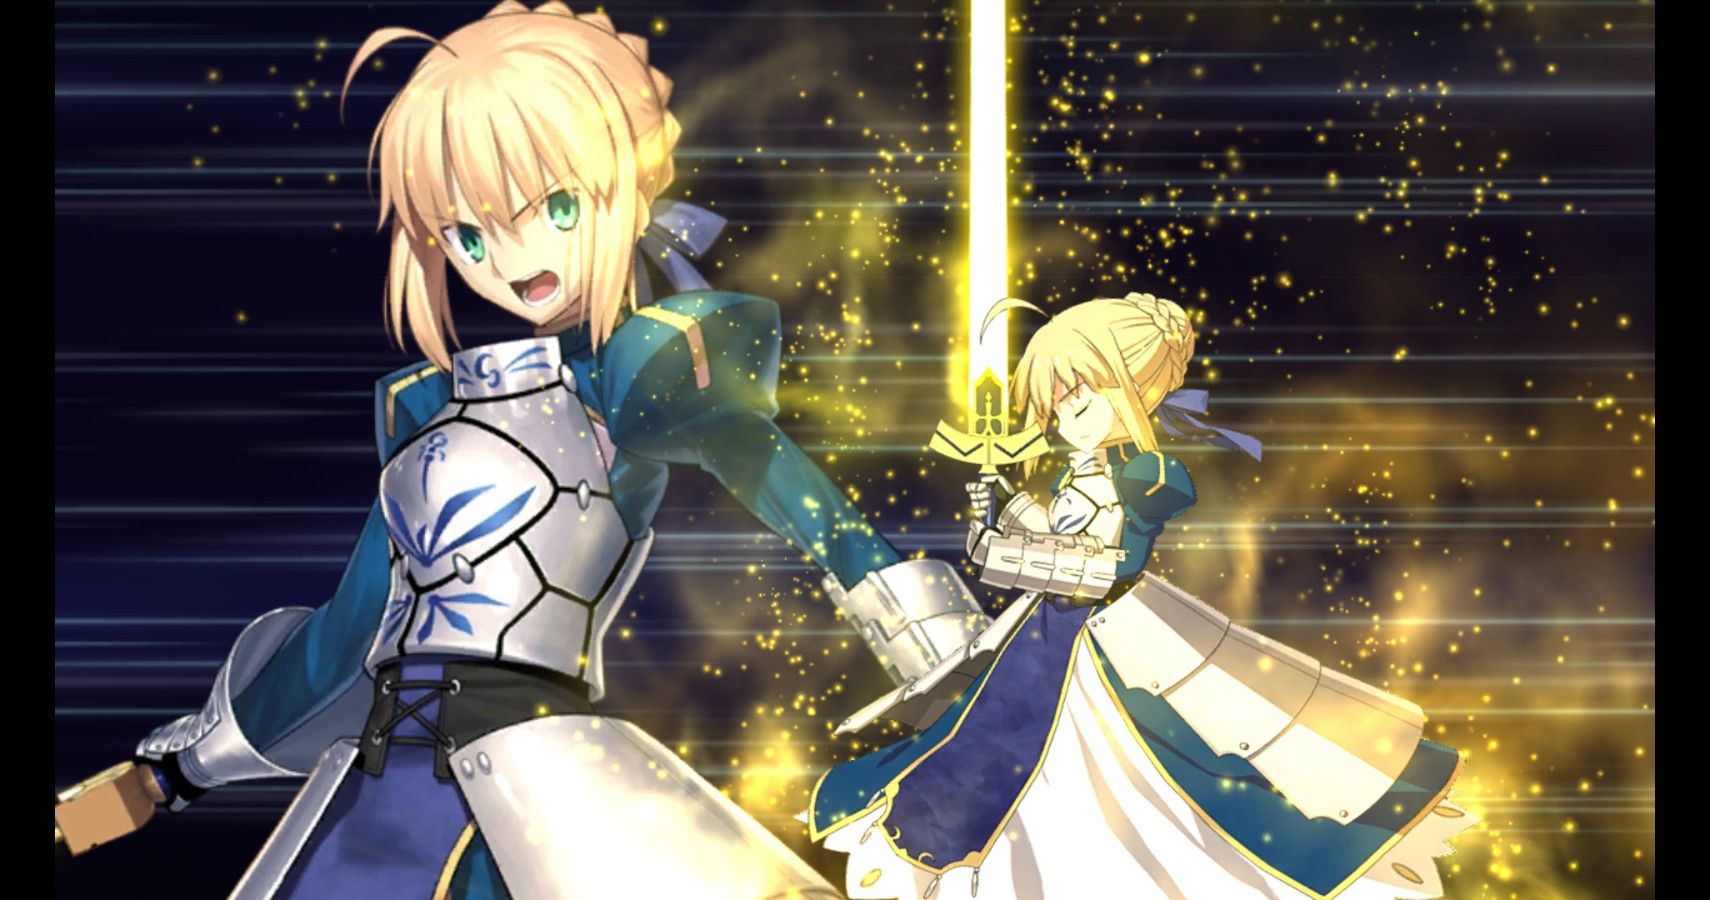 Beginner's Guide To Fate/Grand Order